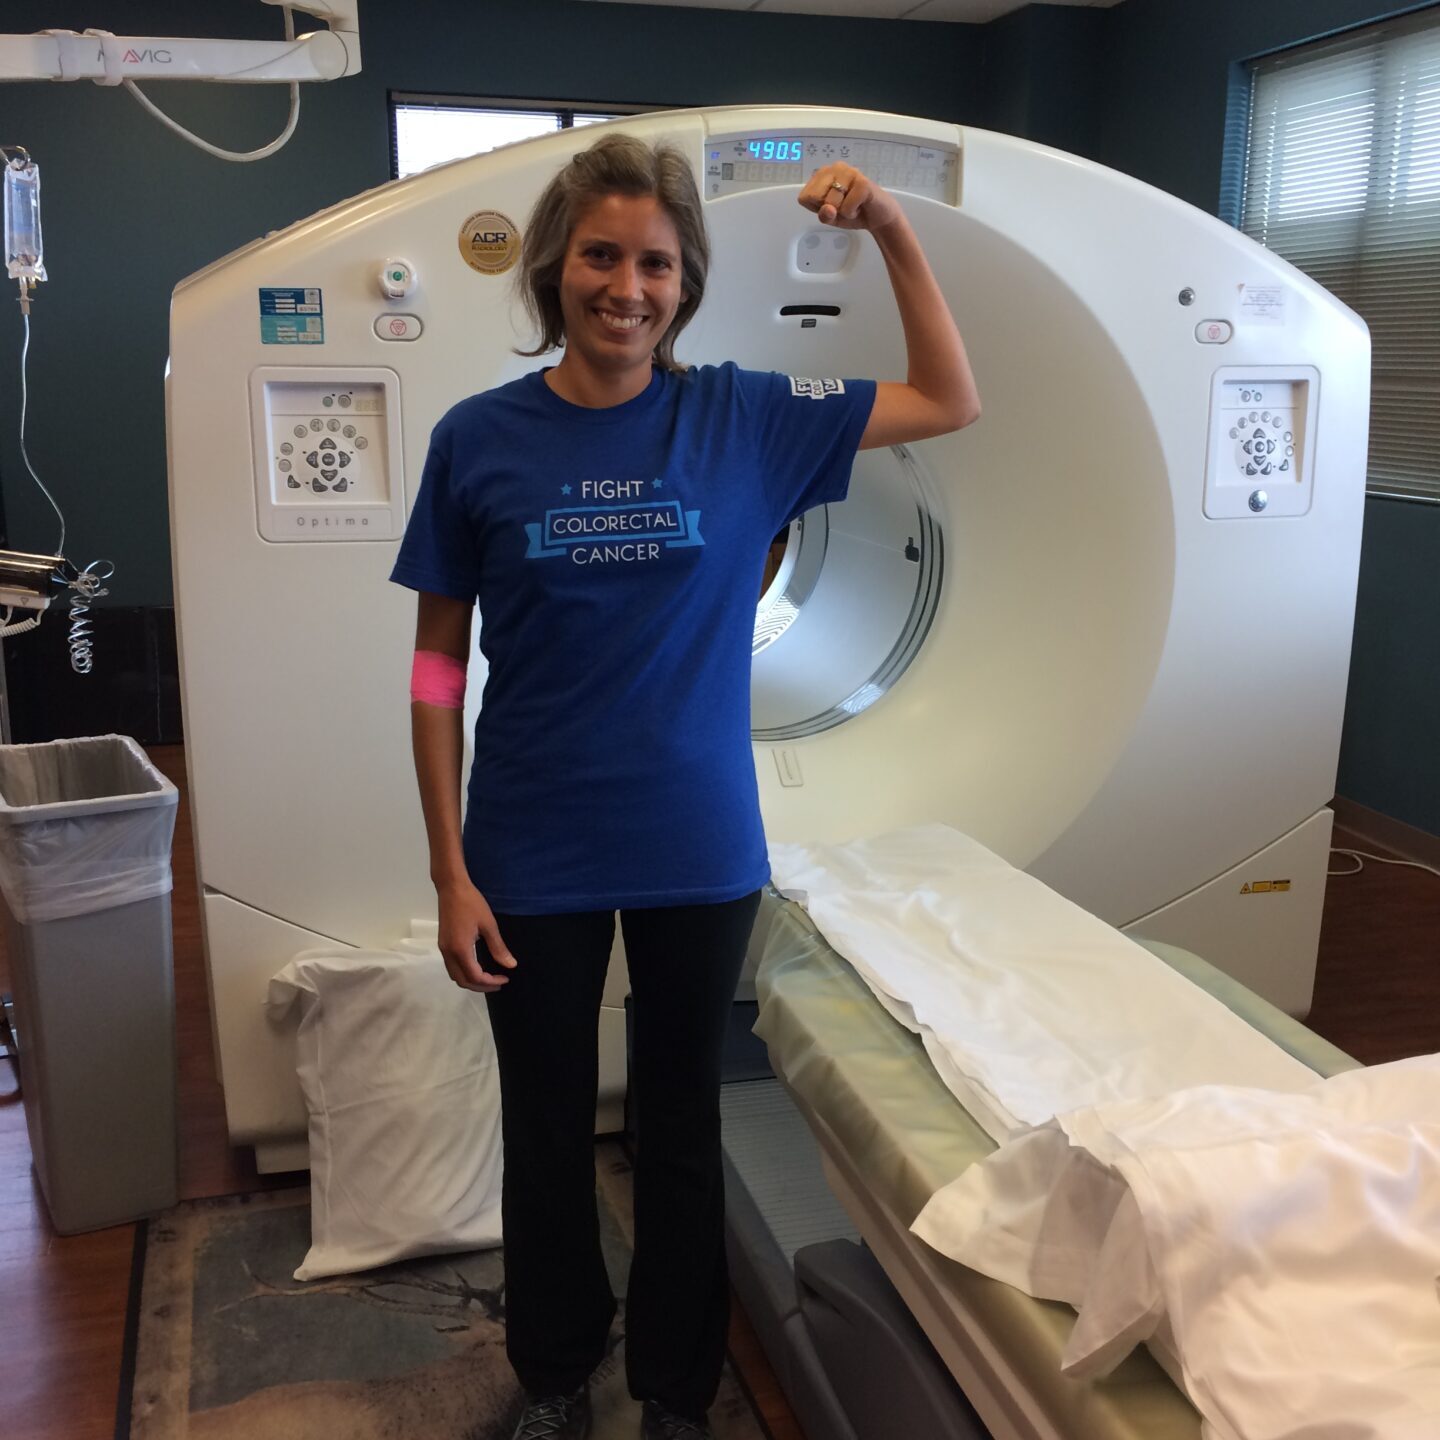 Jelena received a CT scan, MRI and ultrasound to get an accurate diagnosis